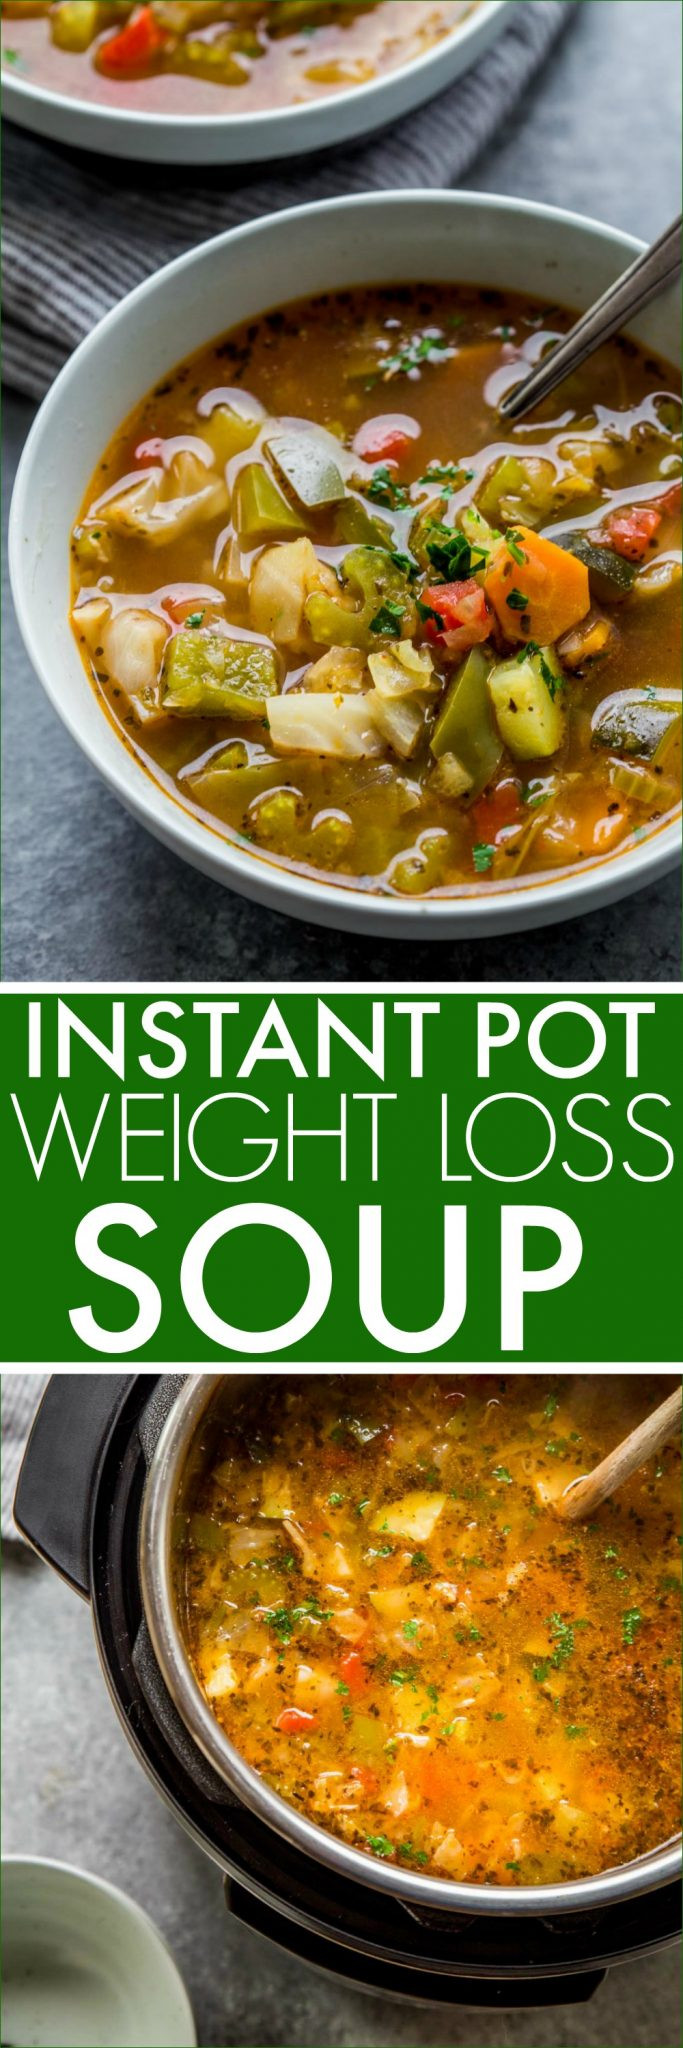 Instant Pot Low Fat Recipes
 Instant Pot Weight Loss Soup with Stovetop Instructions